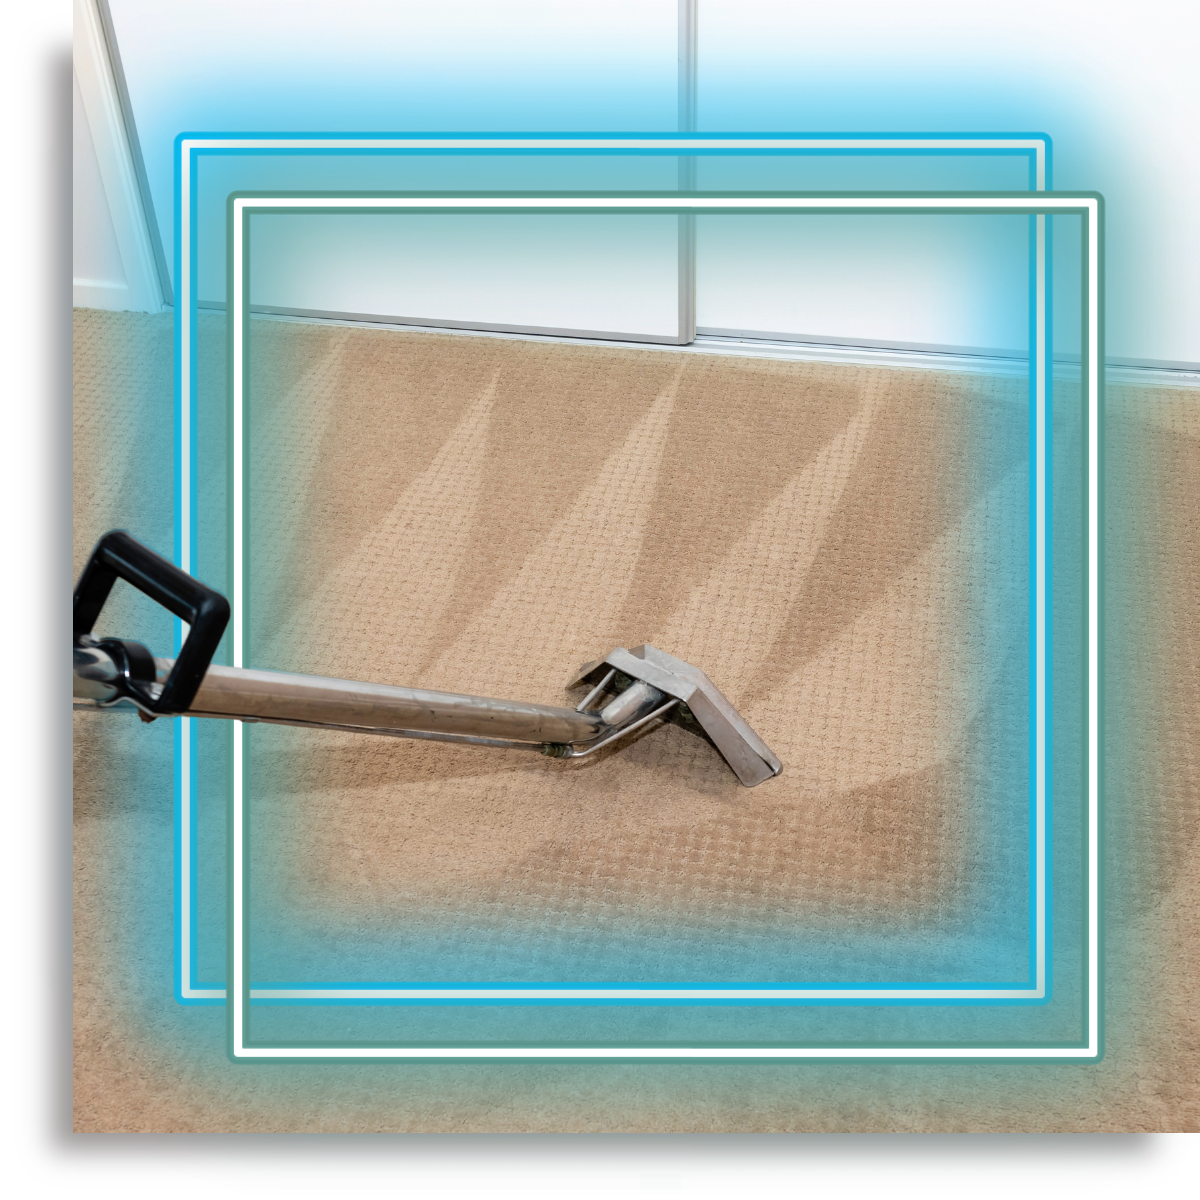 carpet cleaning image 128